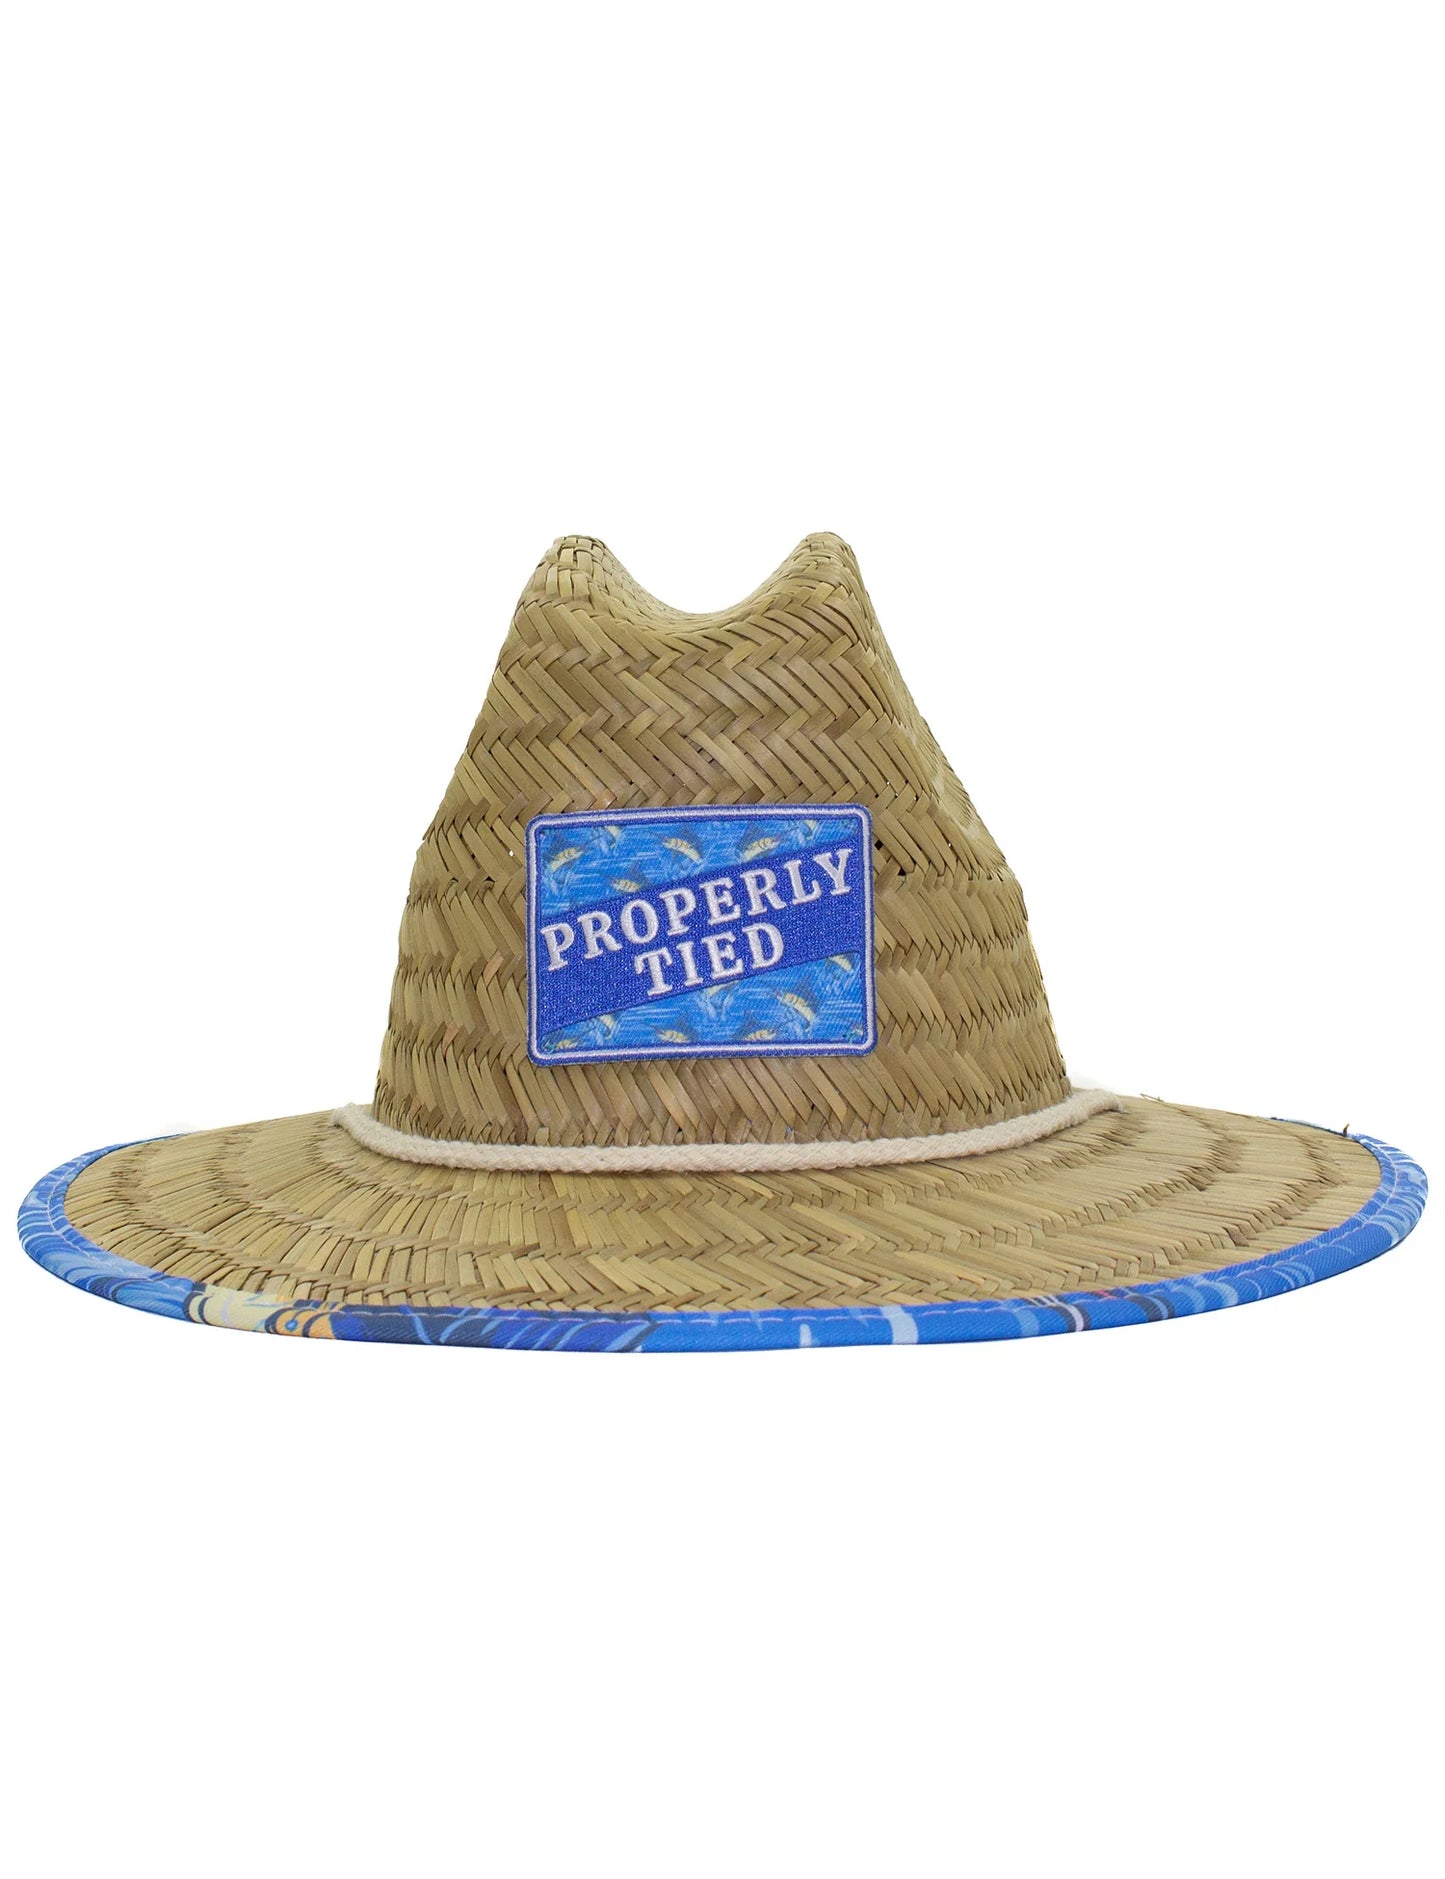 Properly Tied - Cabo Straw Hat Marlin